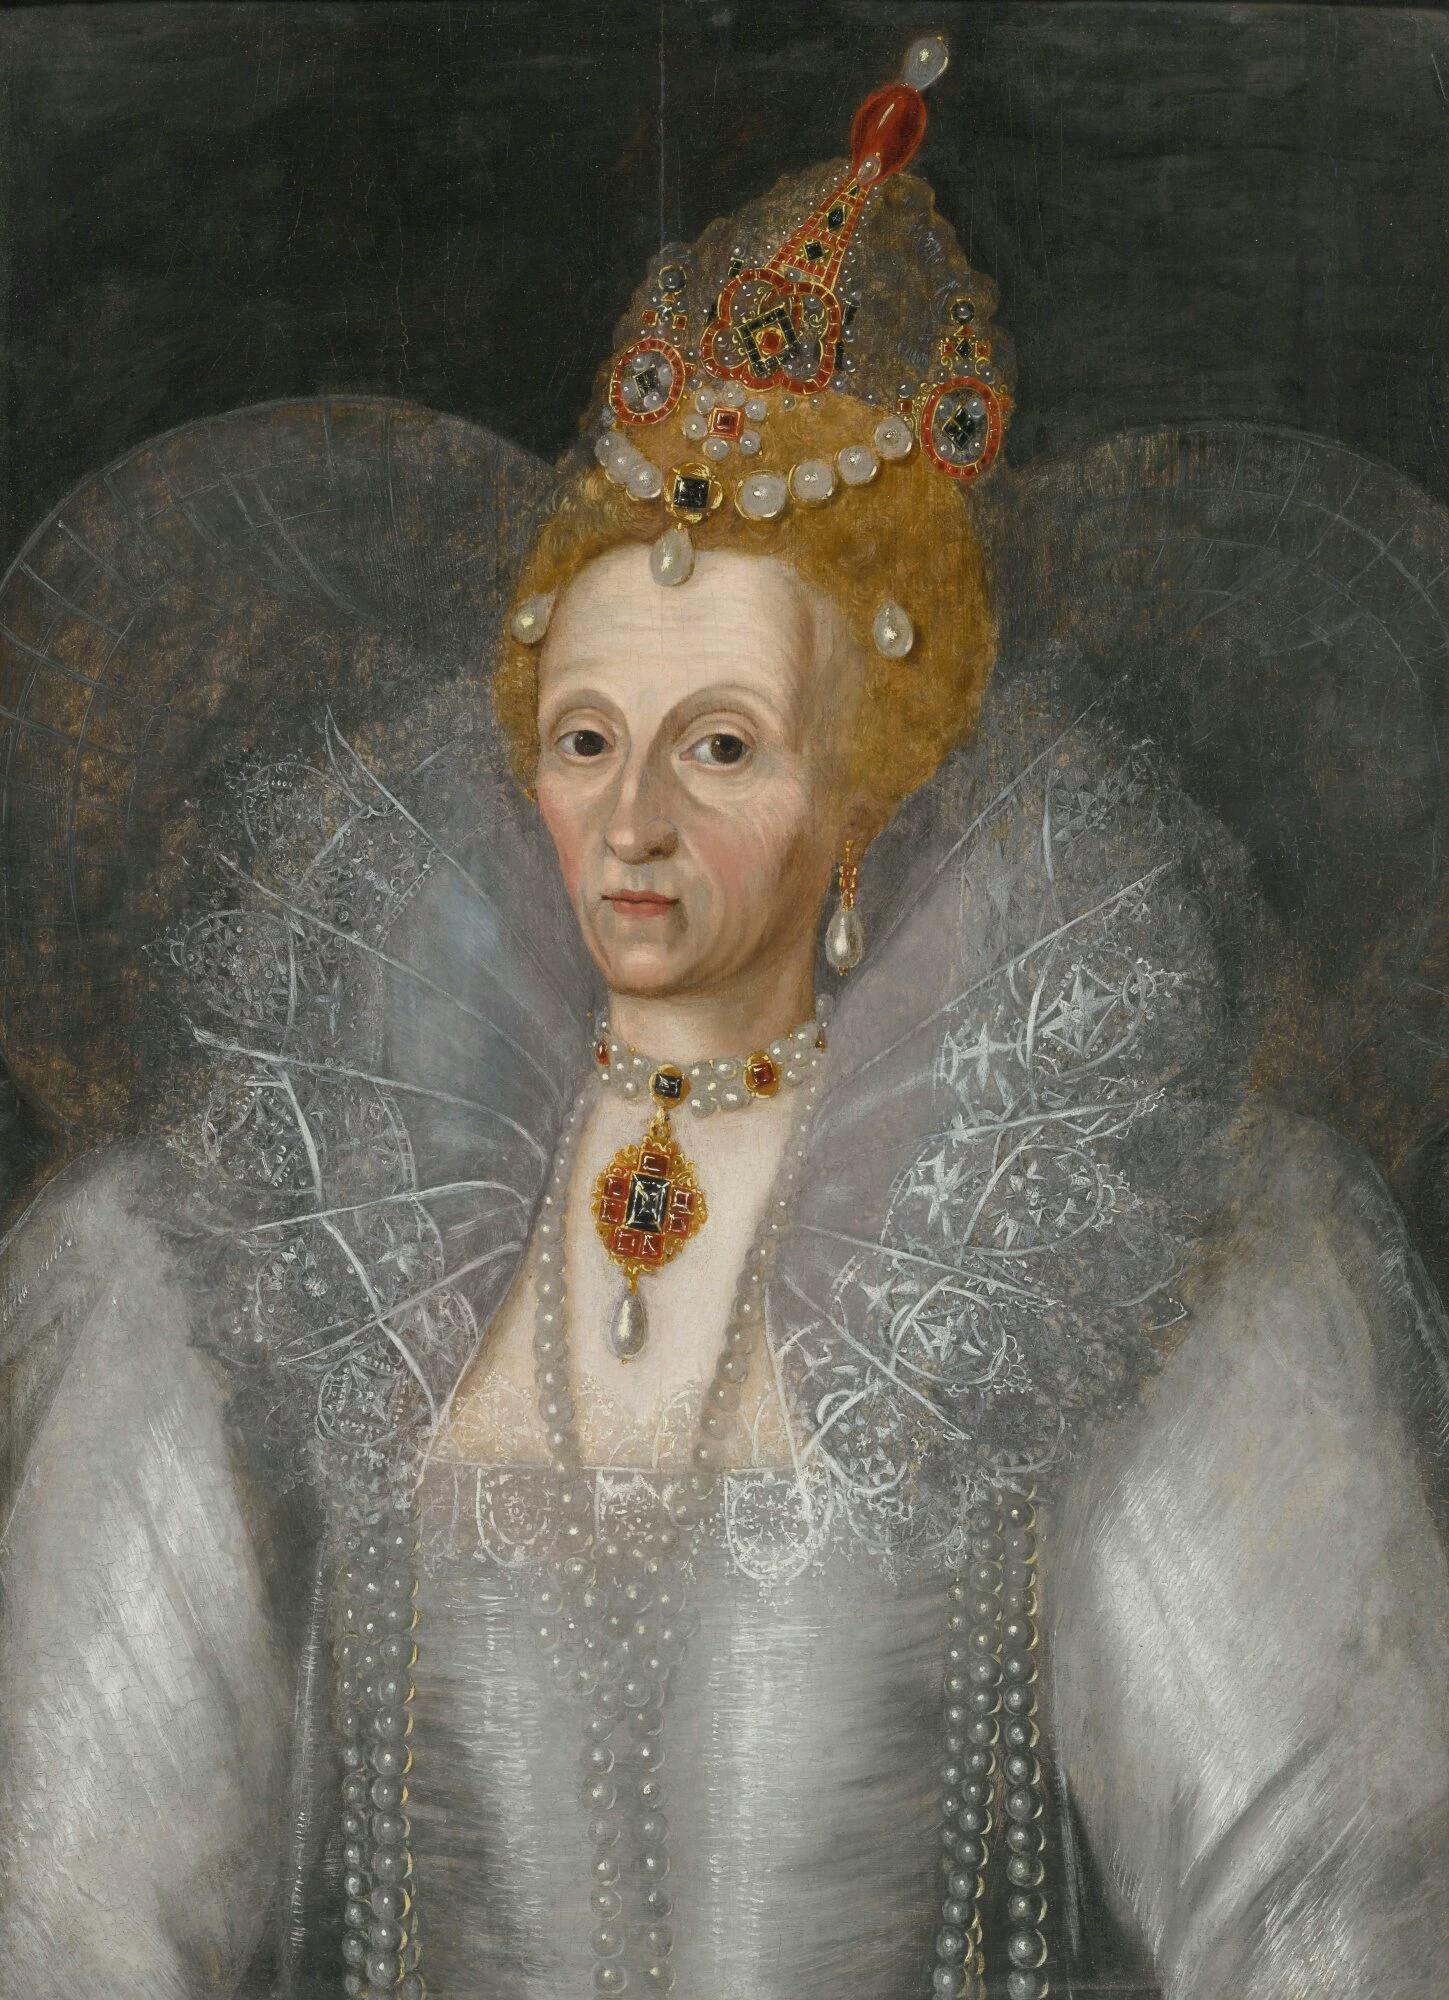 Queen Elizabeth I of England, by After Marcus Gheeraerts the Younger. Public Domain/Wikimedia Commons